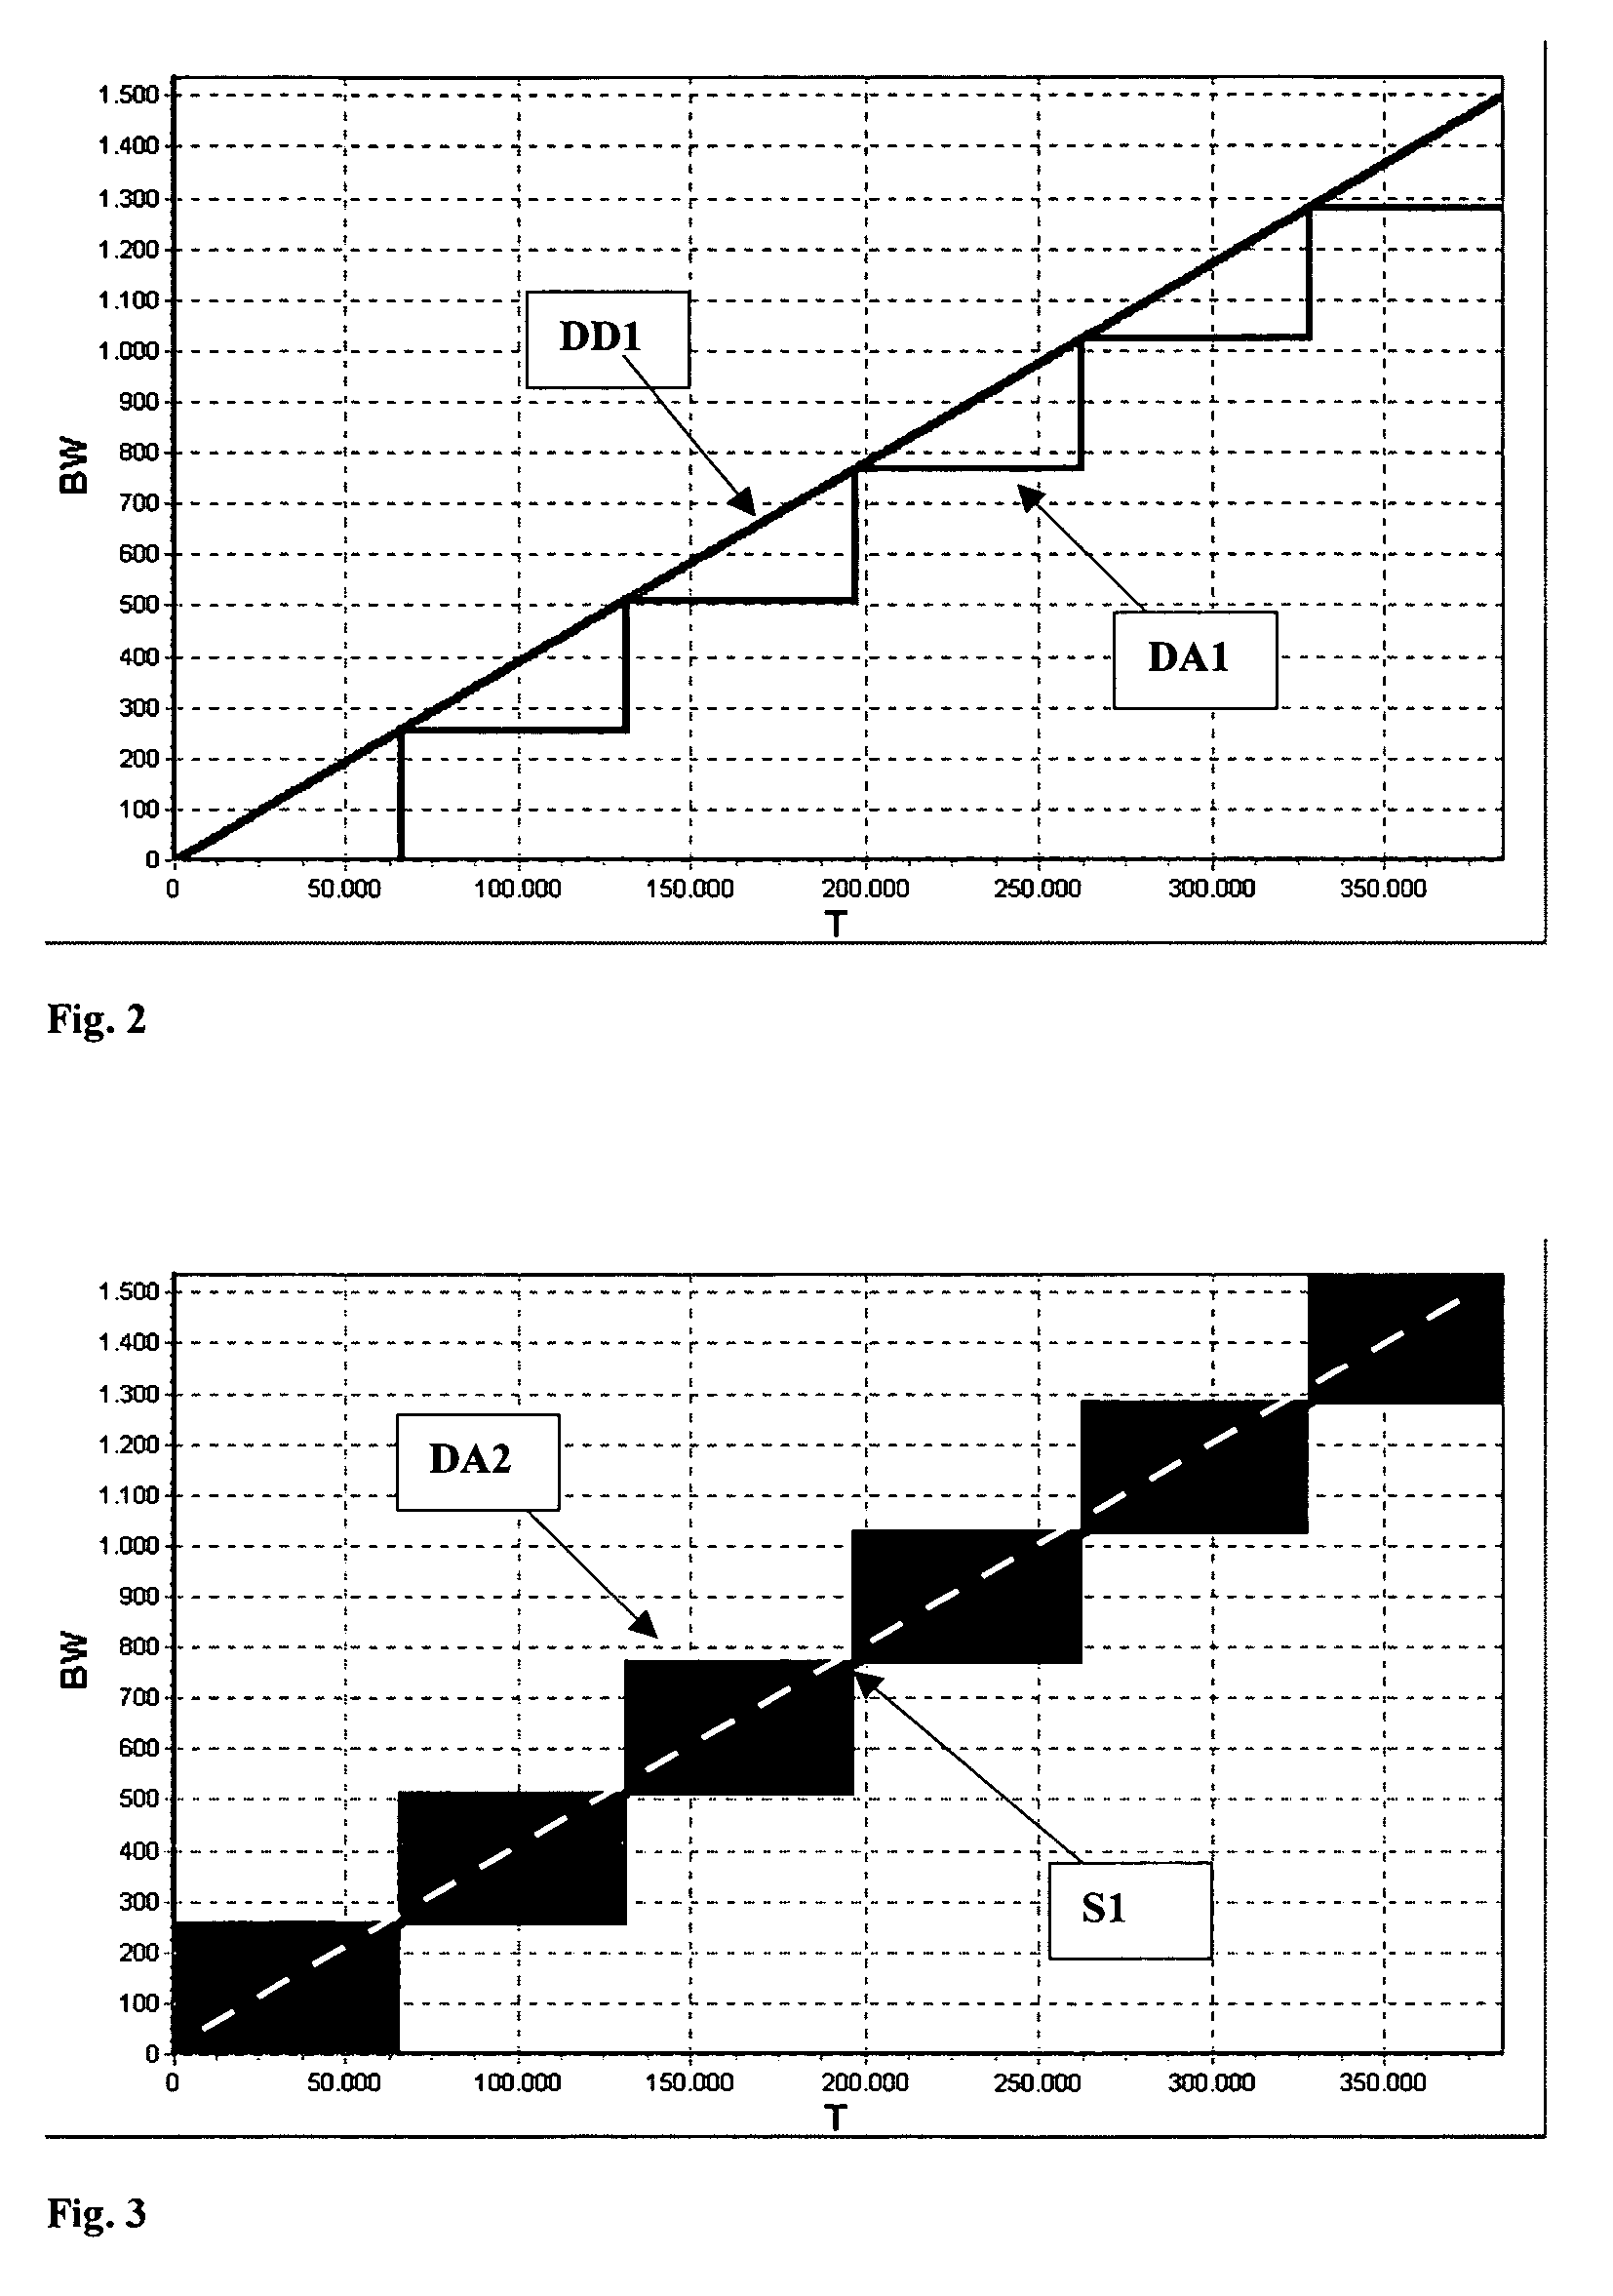 Recording or reproduction apparatus for optical recording media having means for increasing the resolution of a digital-to-analog converter in the servo regulating circuit